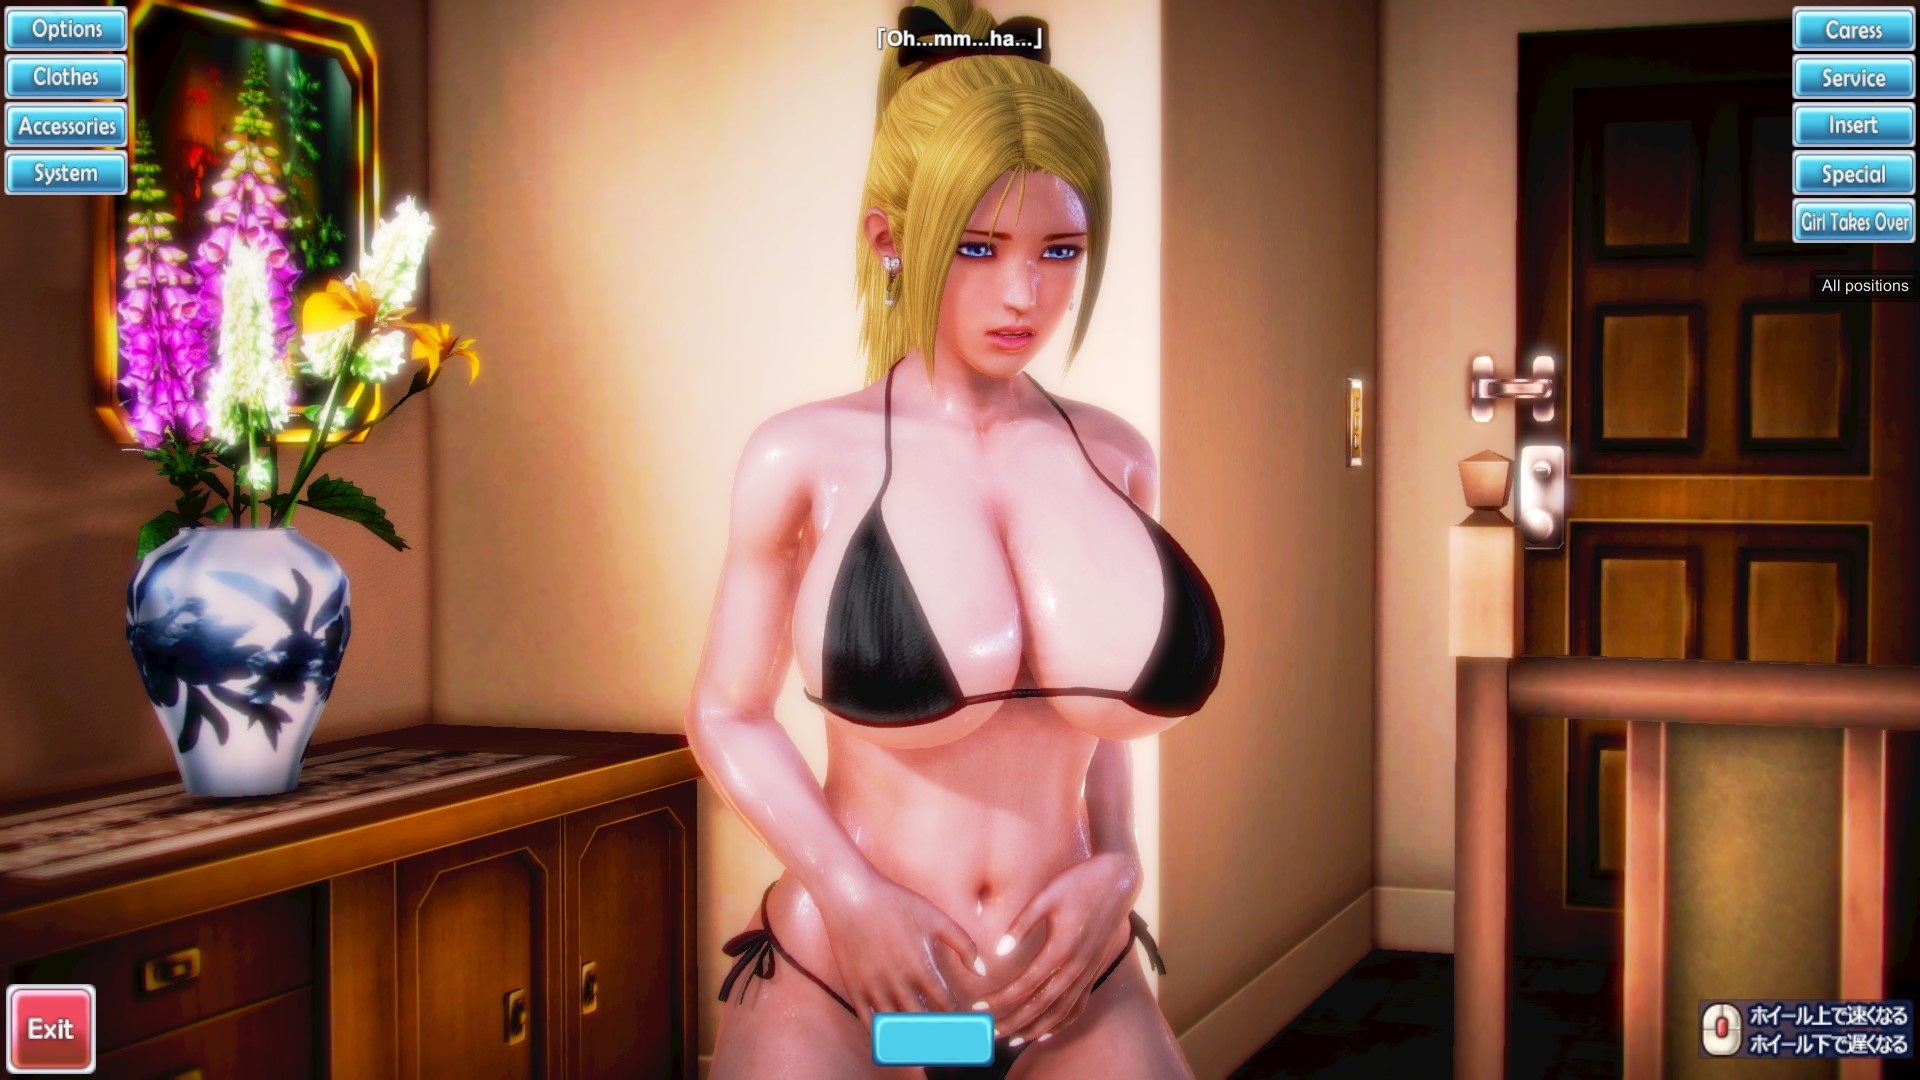 how to download honey select